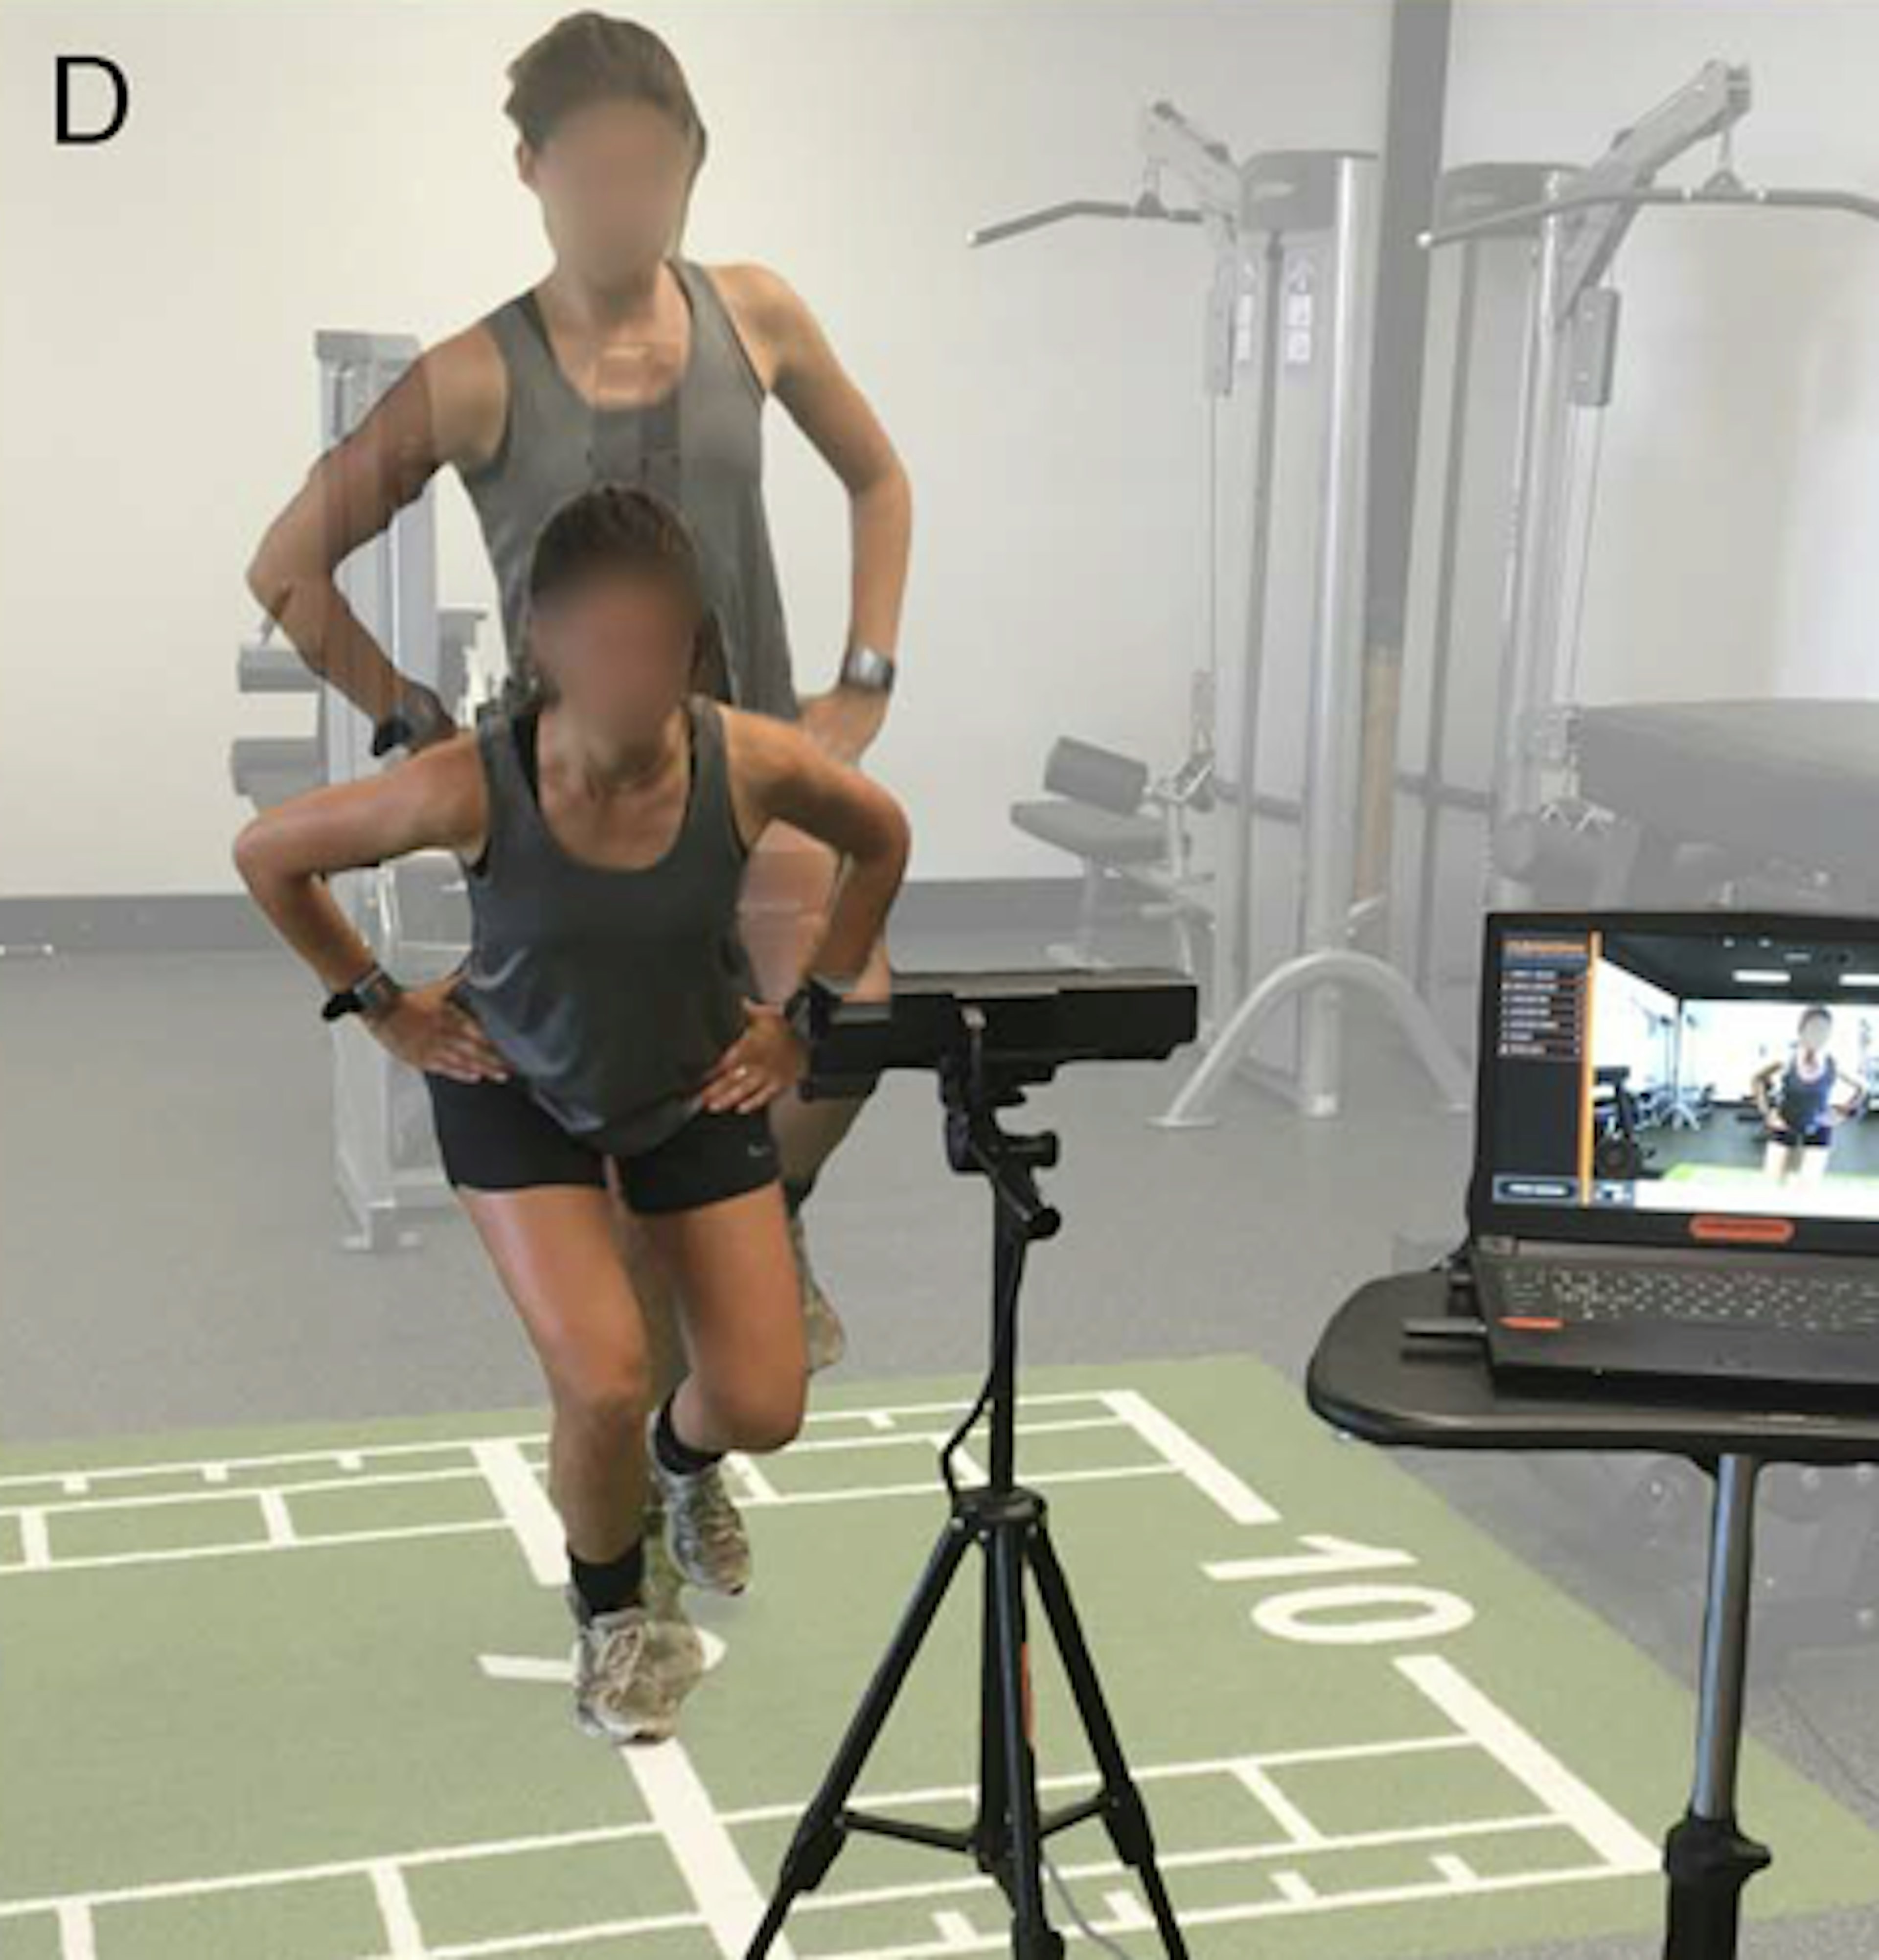 Single-leg triple vertical hop kinematics being assessed with HumanTrak